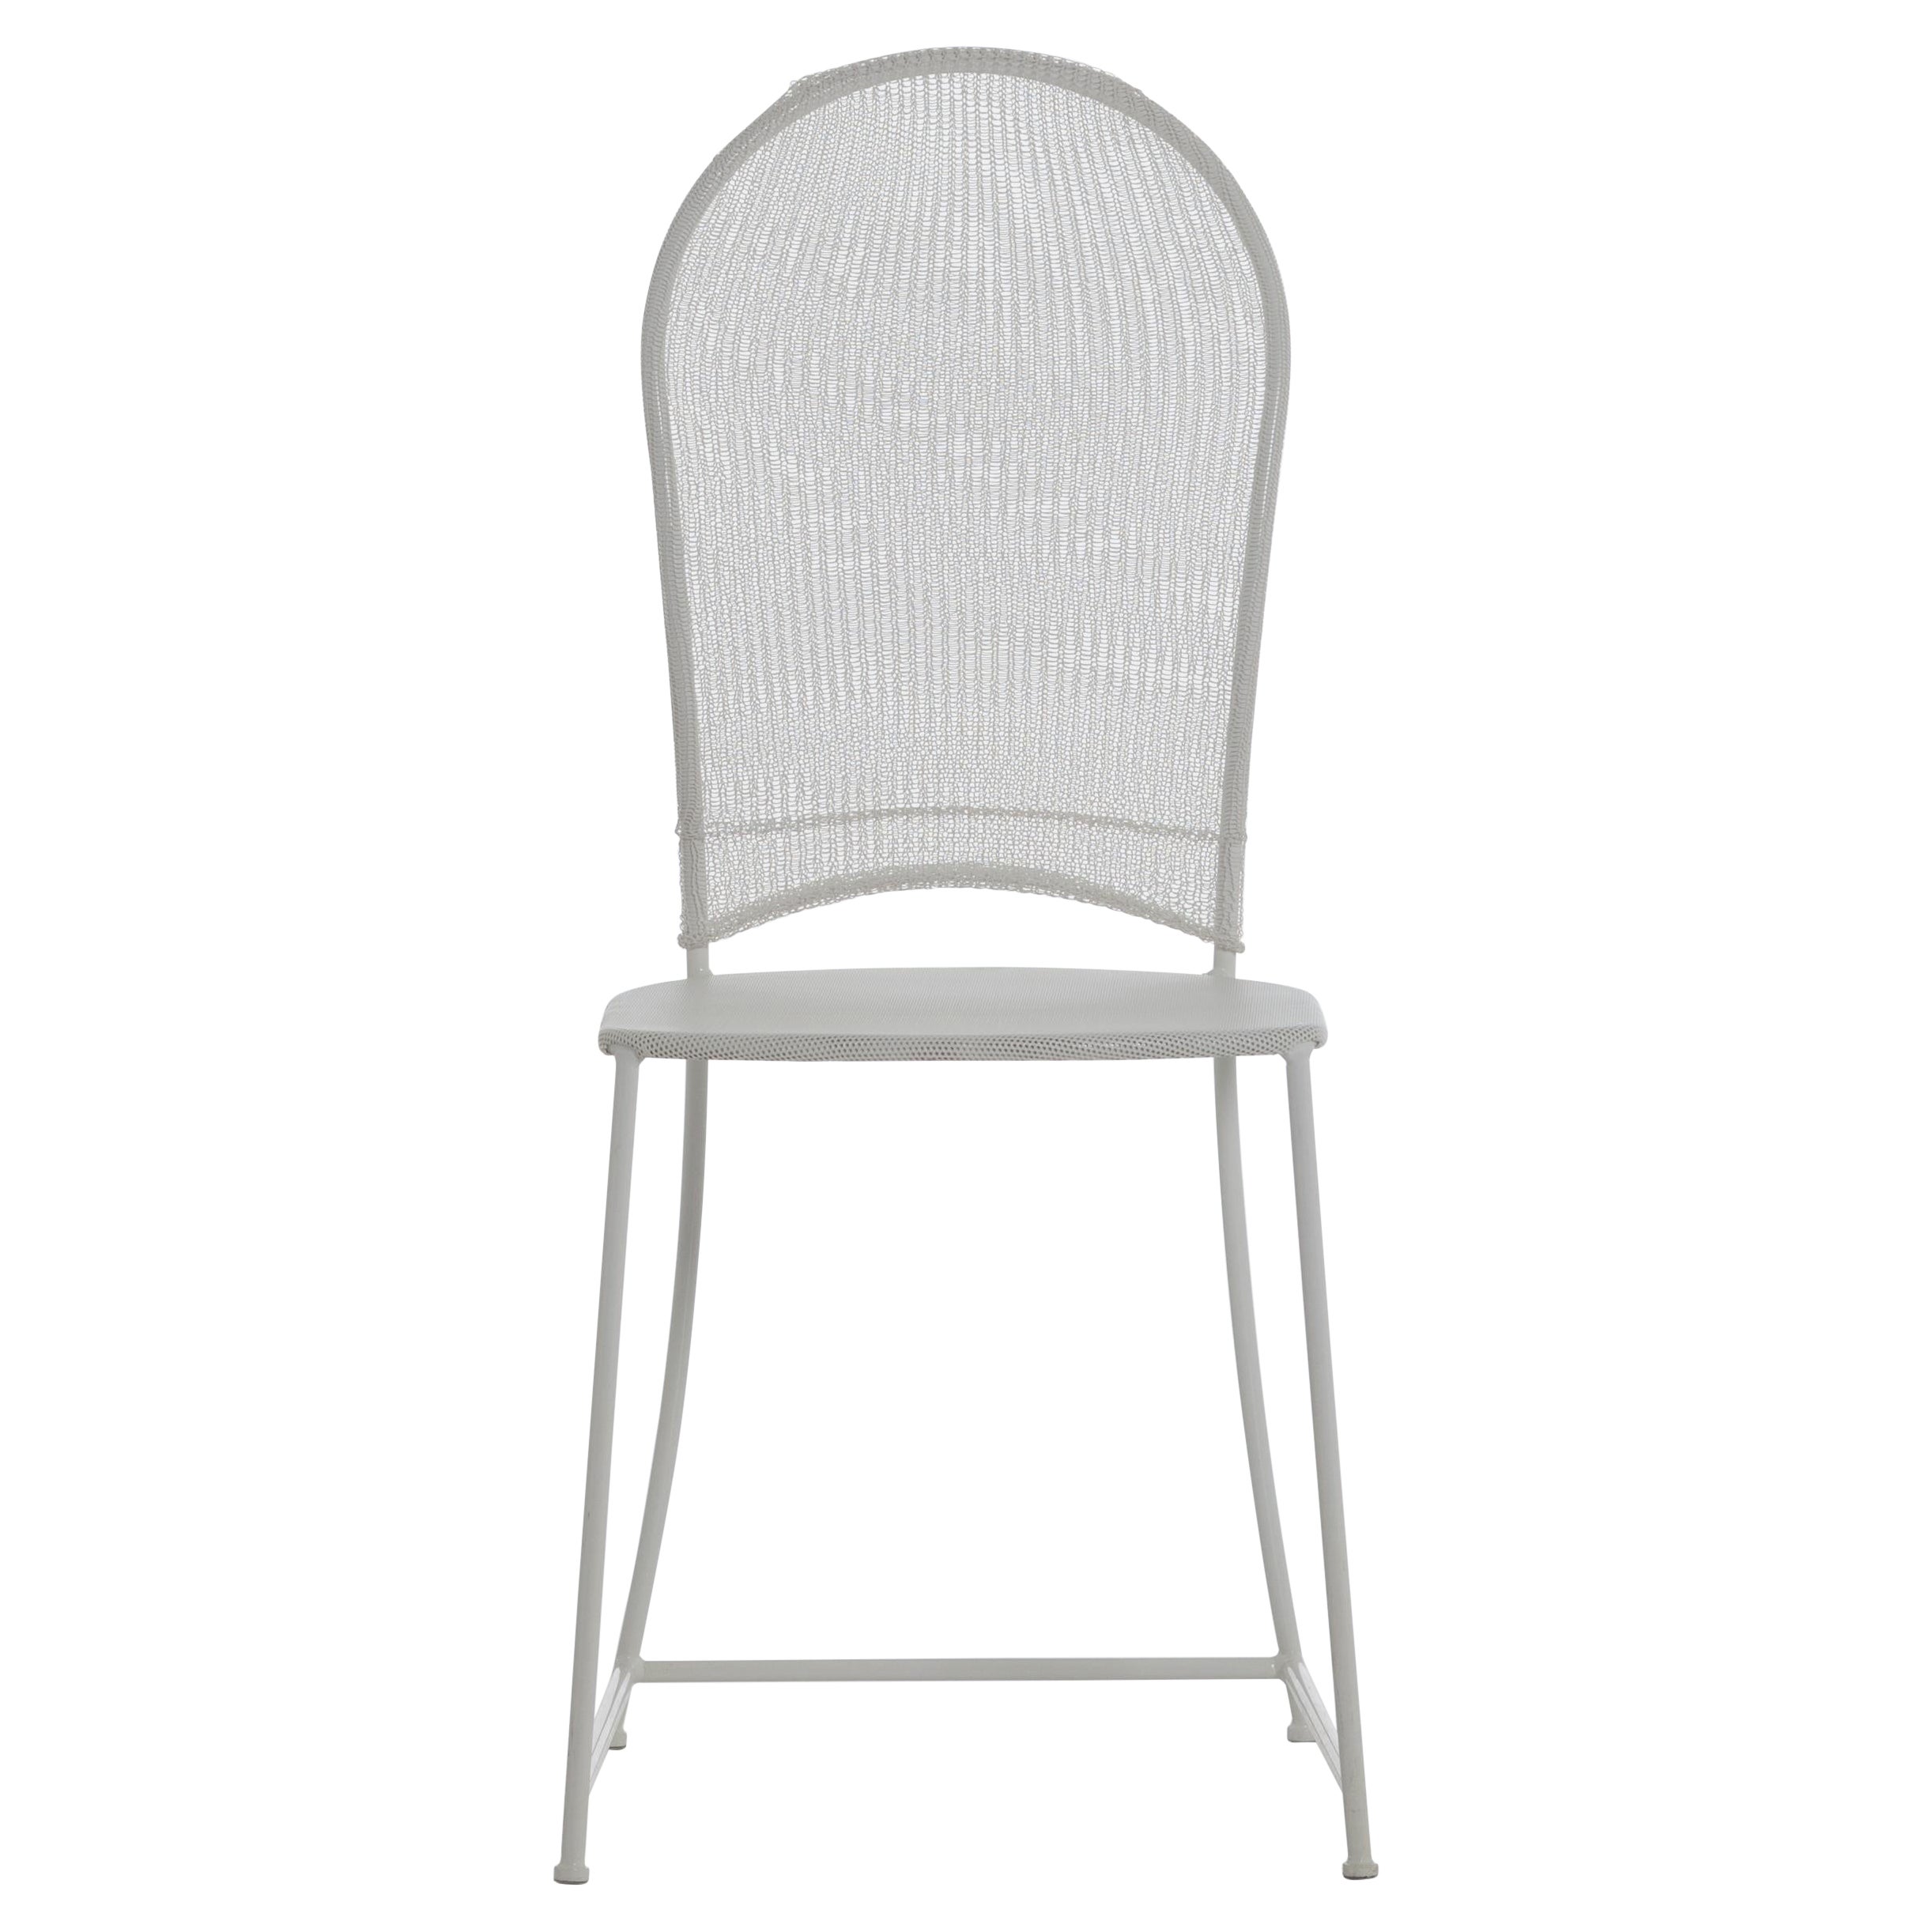 Gervasoni Inout 873 Chair in White Lacquered Steel with PVC Mesh Back Cover For Sale